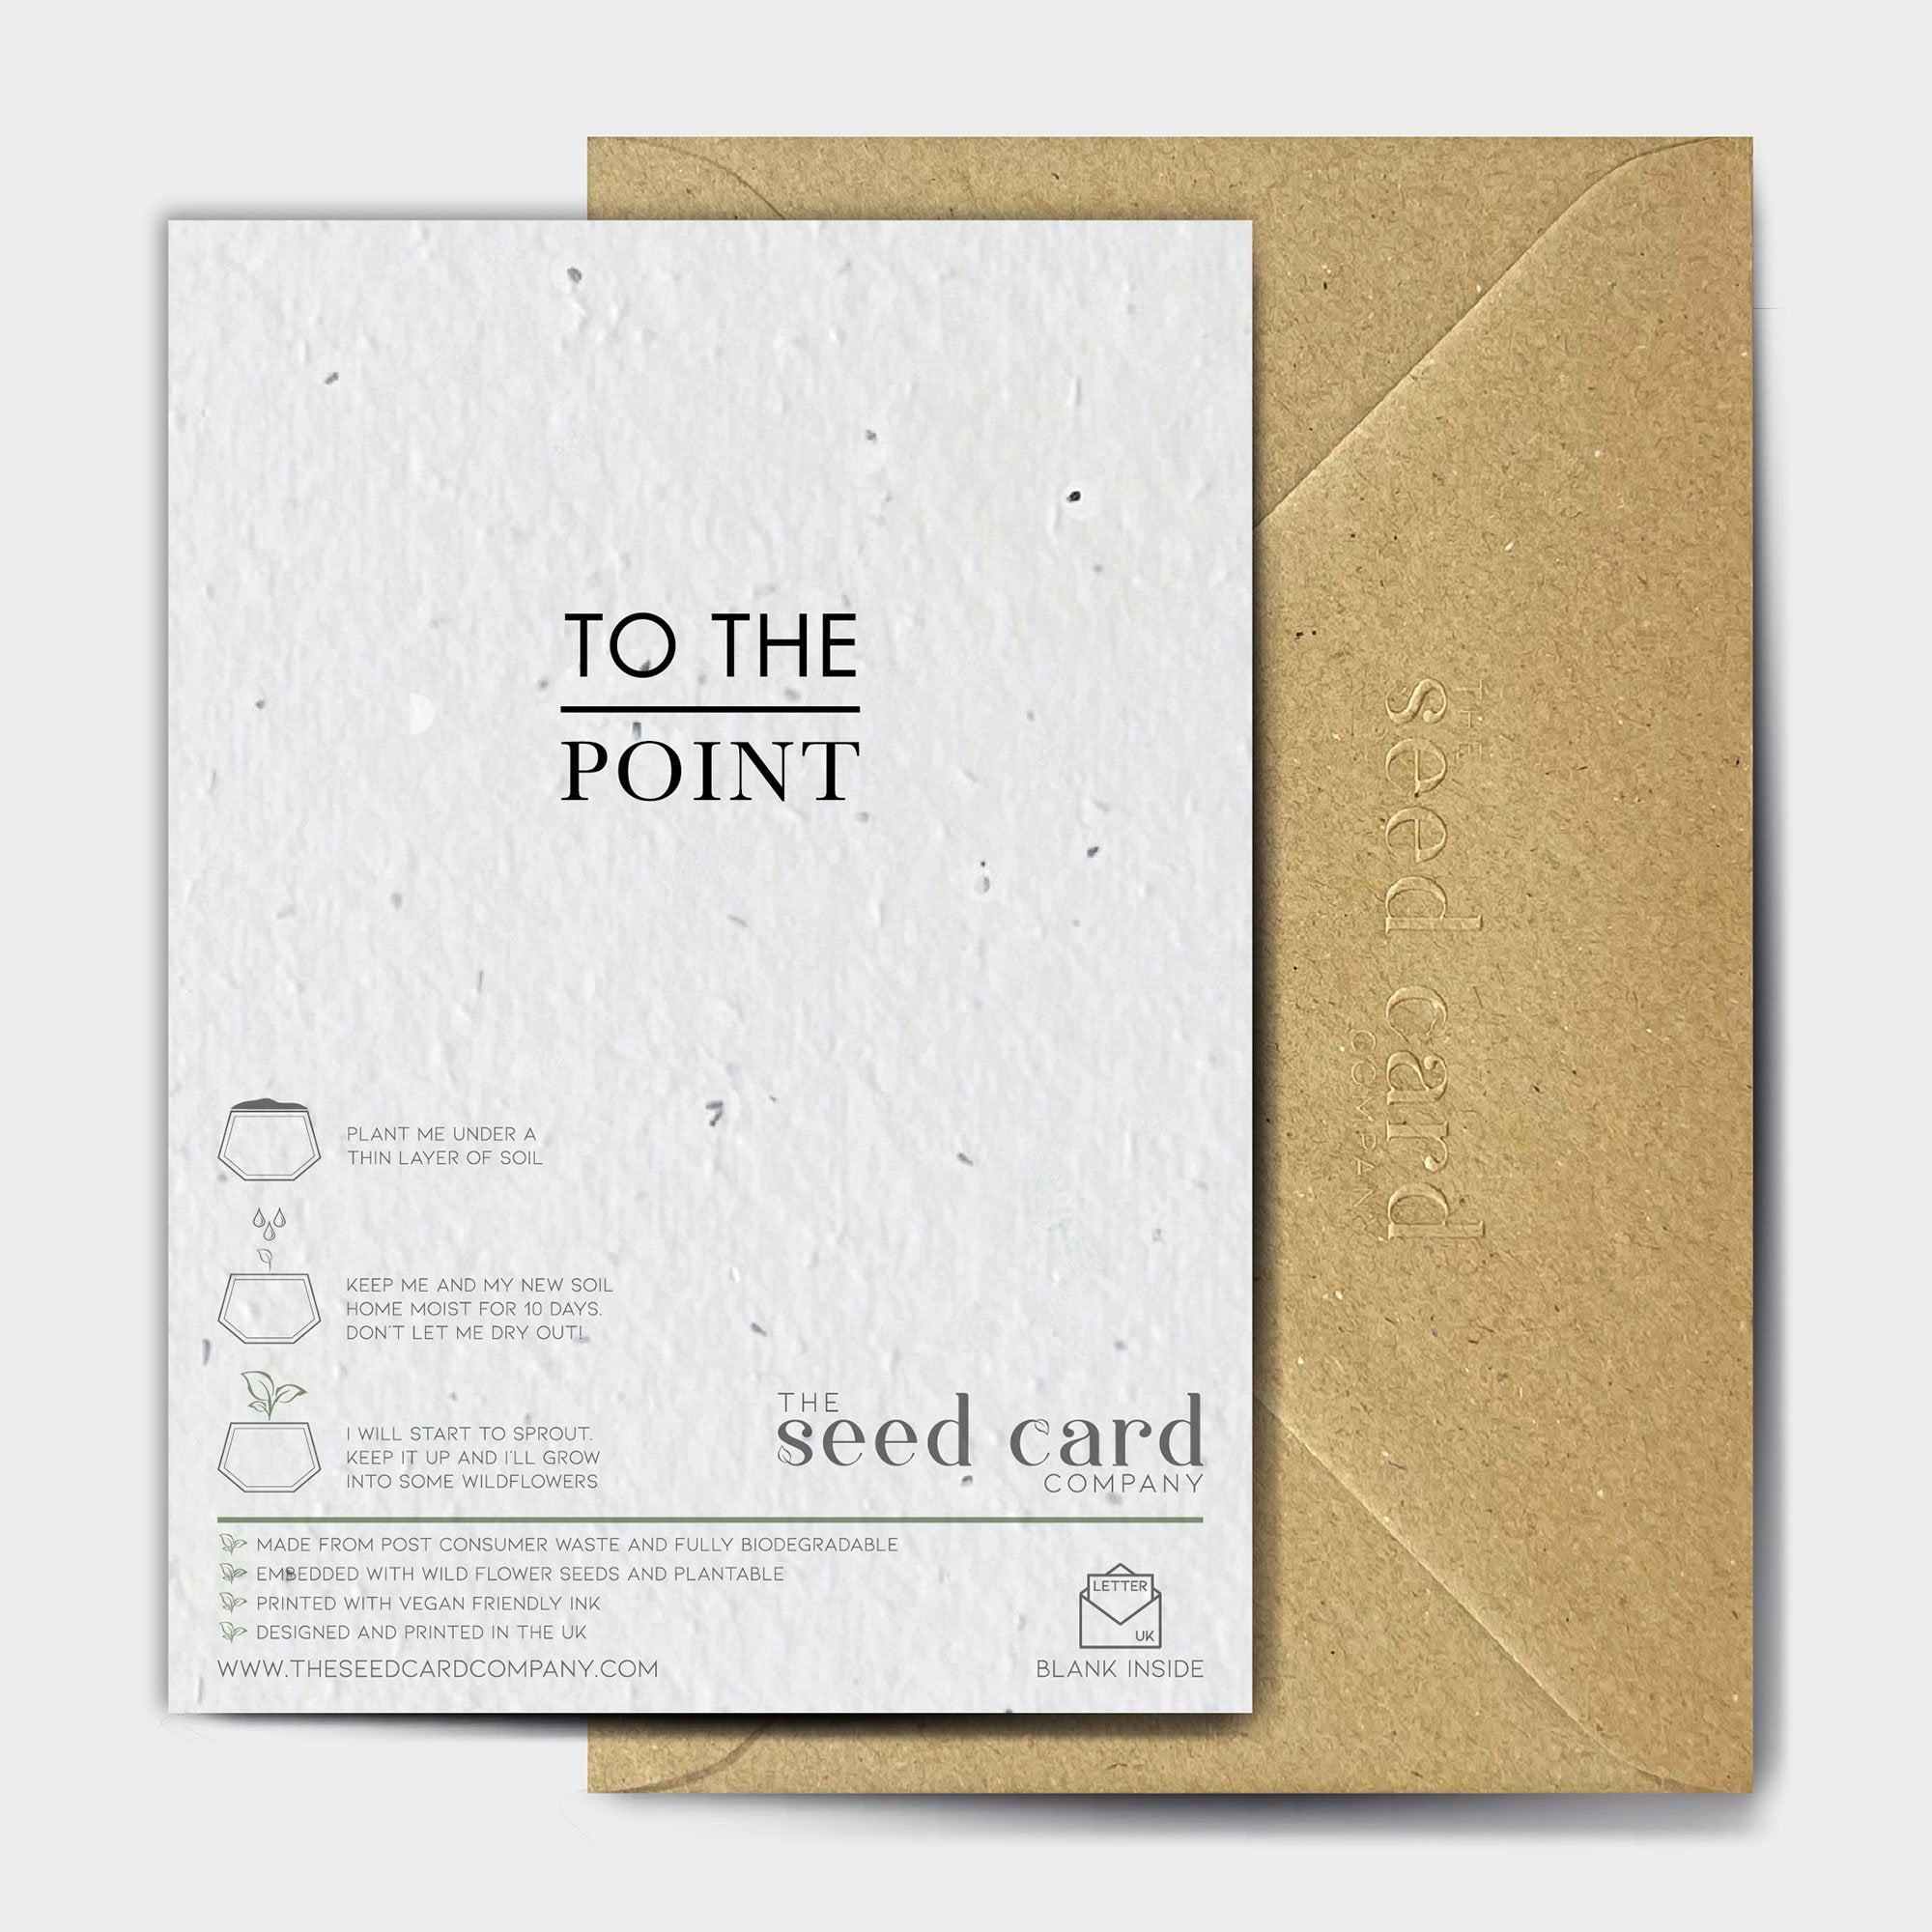 Shop online You're Lucky You Got This - 100% biodegradable seed-embedded cards Shop -The Seed Card Company